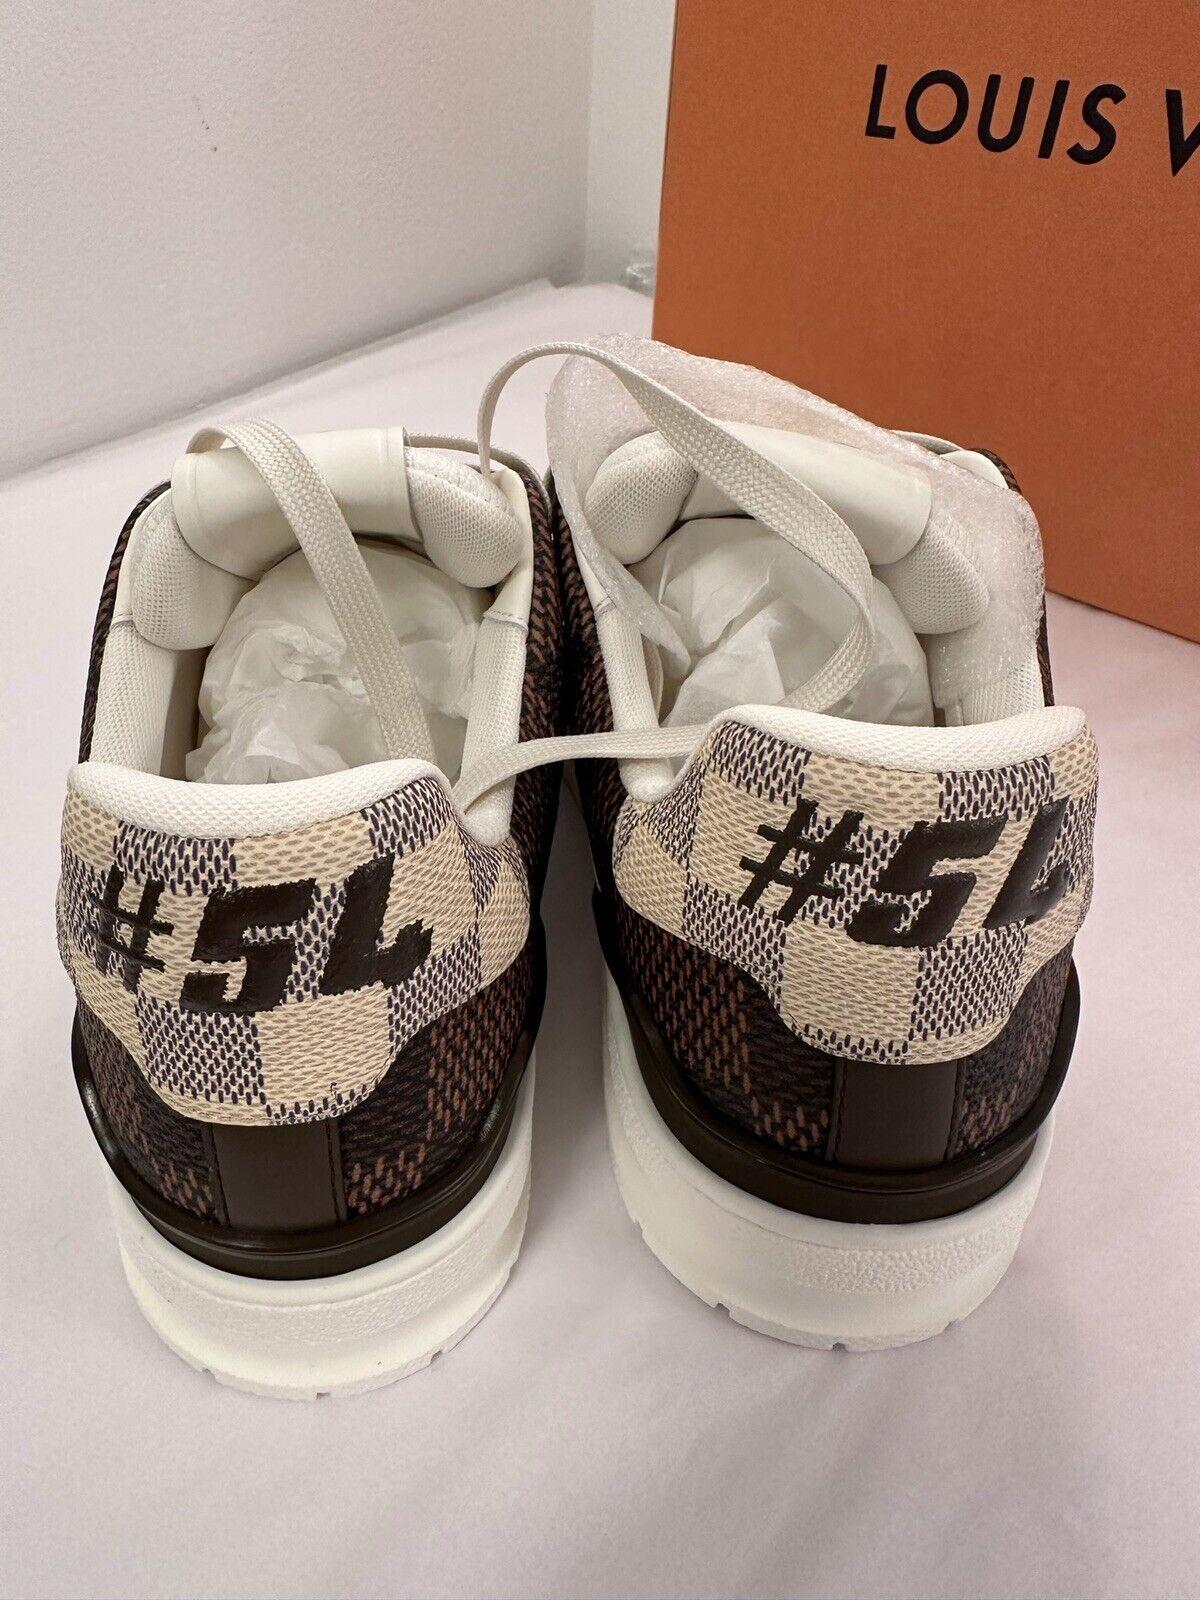 Beige Louis Vuitton Lv Trainer Damier Brand New Size 6 Sold Out! For Sale